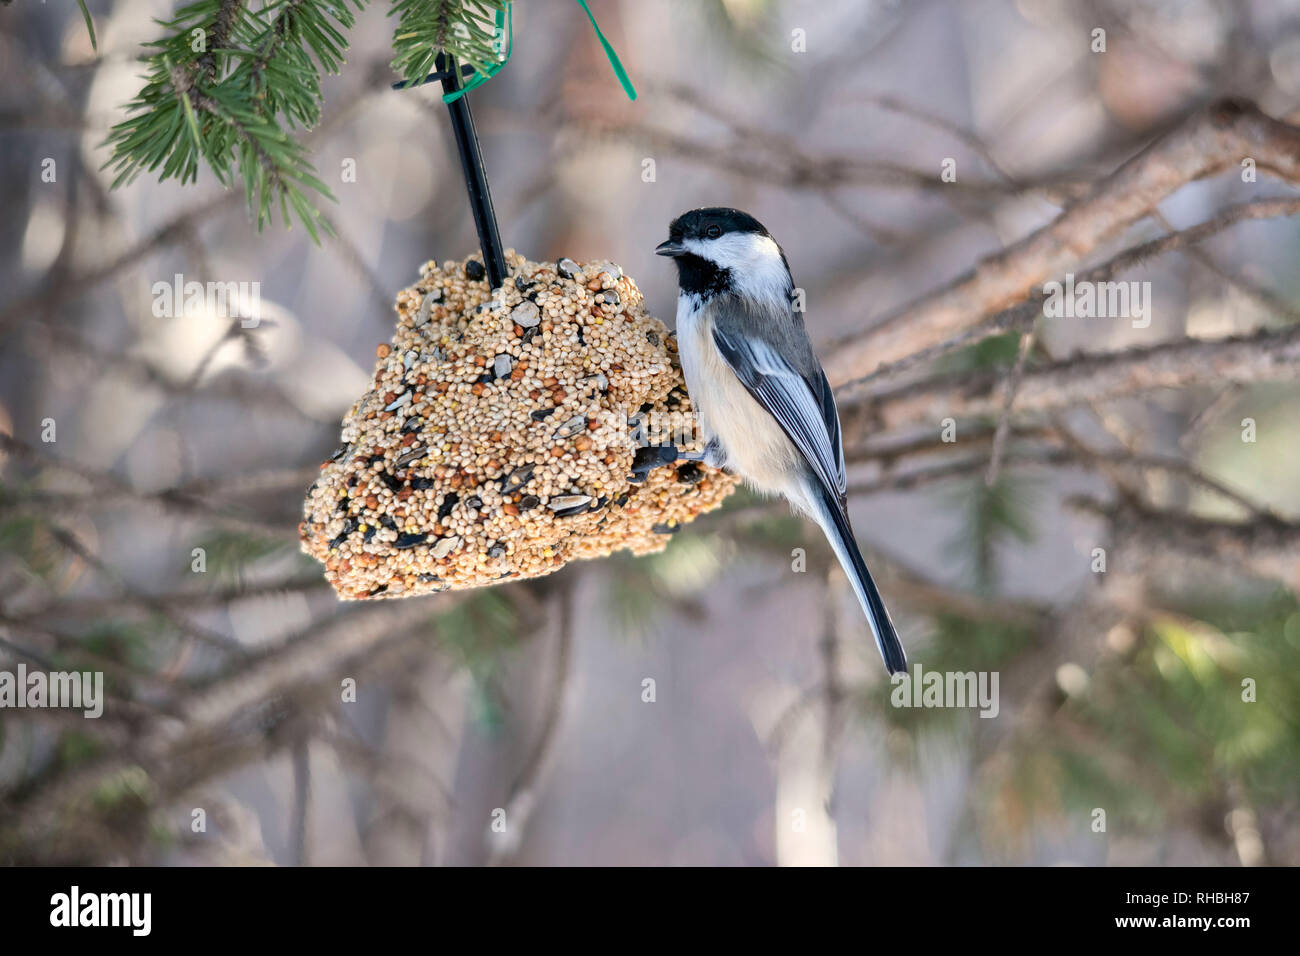 A black-capped chickadee perched on a ball of seed in winter. Stock Photo